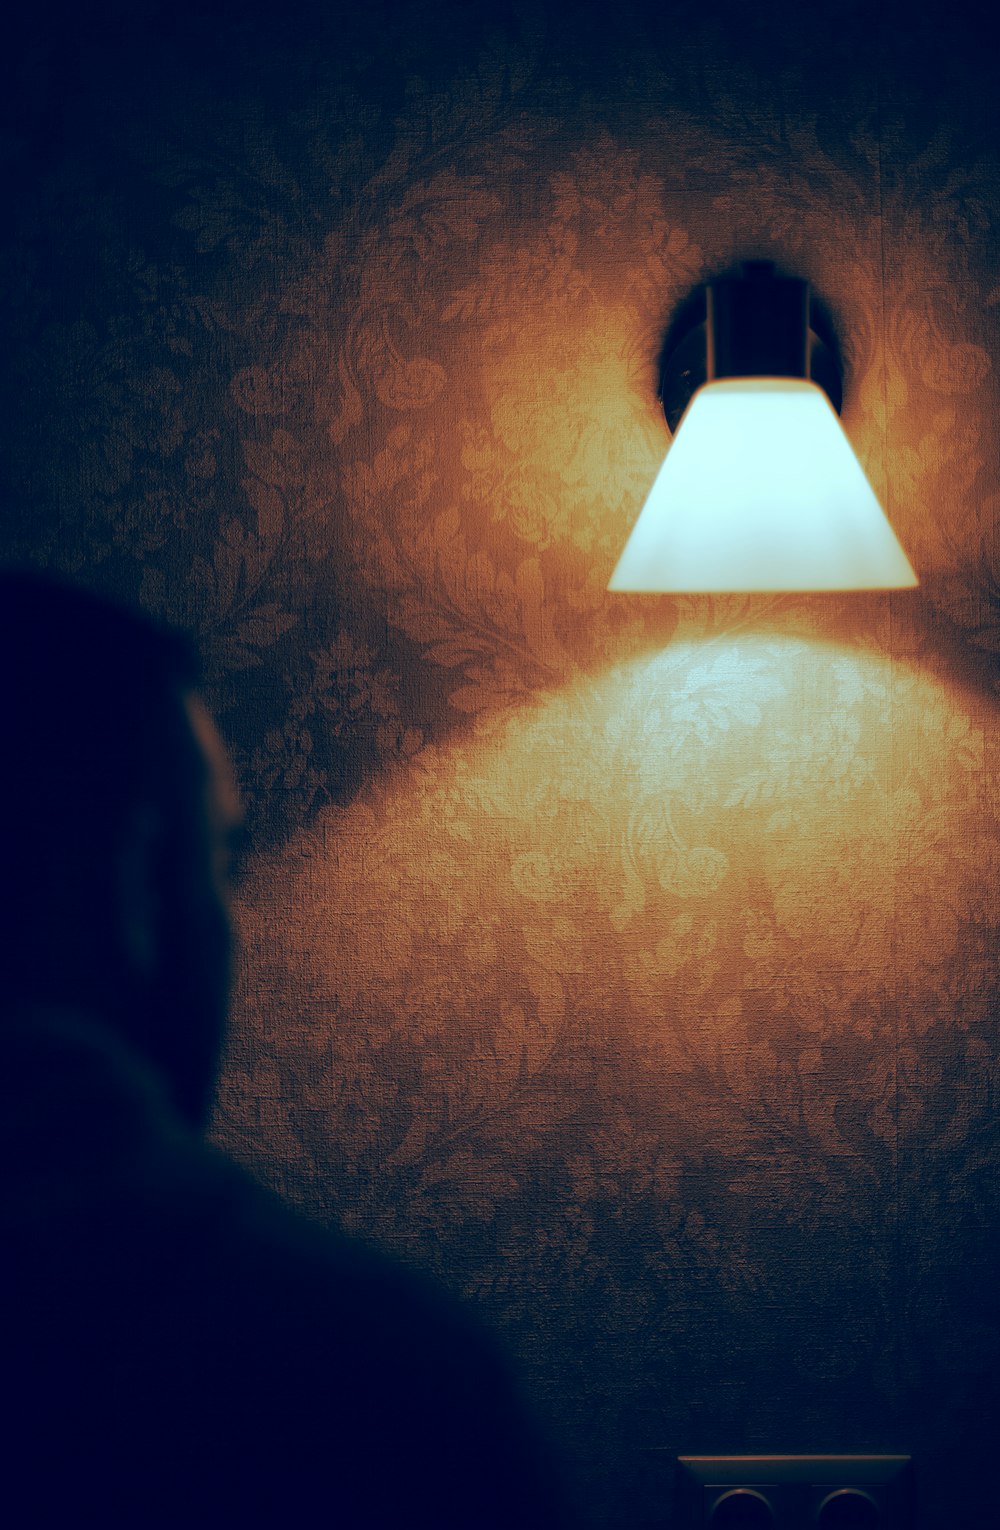 a man standing in front of a lamp in a dark room